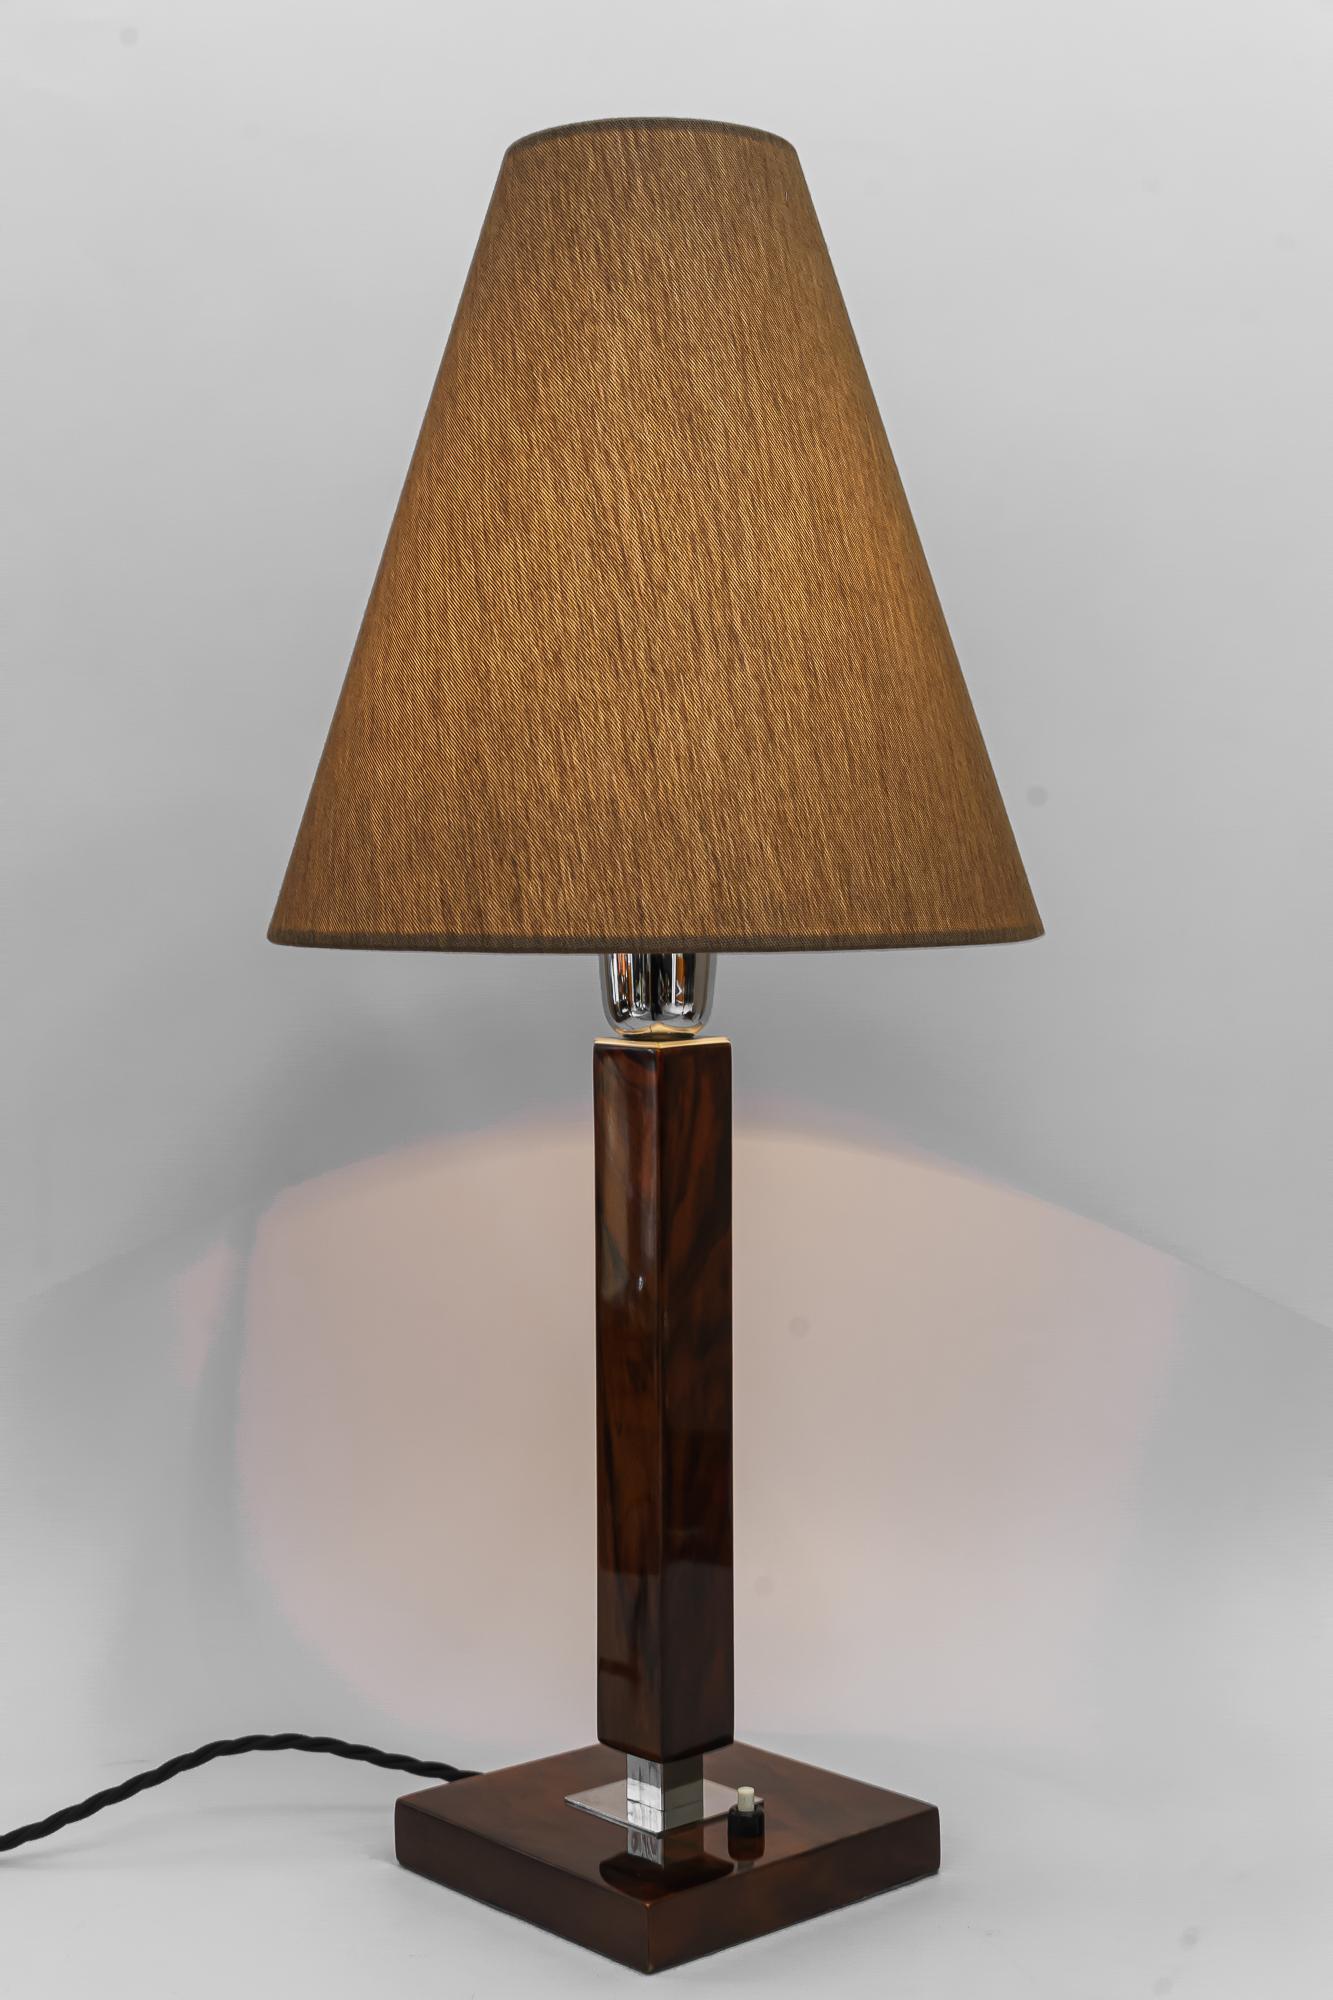 Nickel Art Deco Table Lamp Vienna Around 1920 Nut Wood and Fabric Shade For Sale